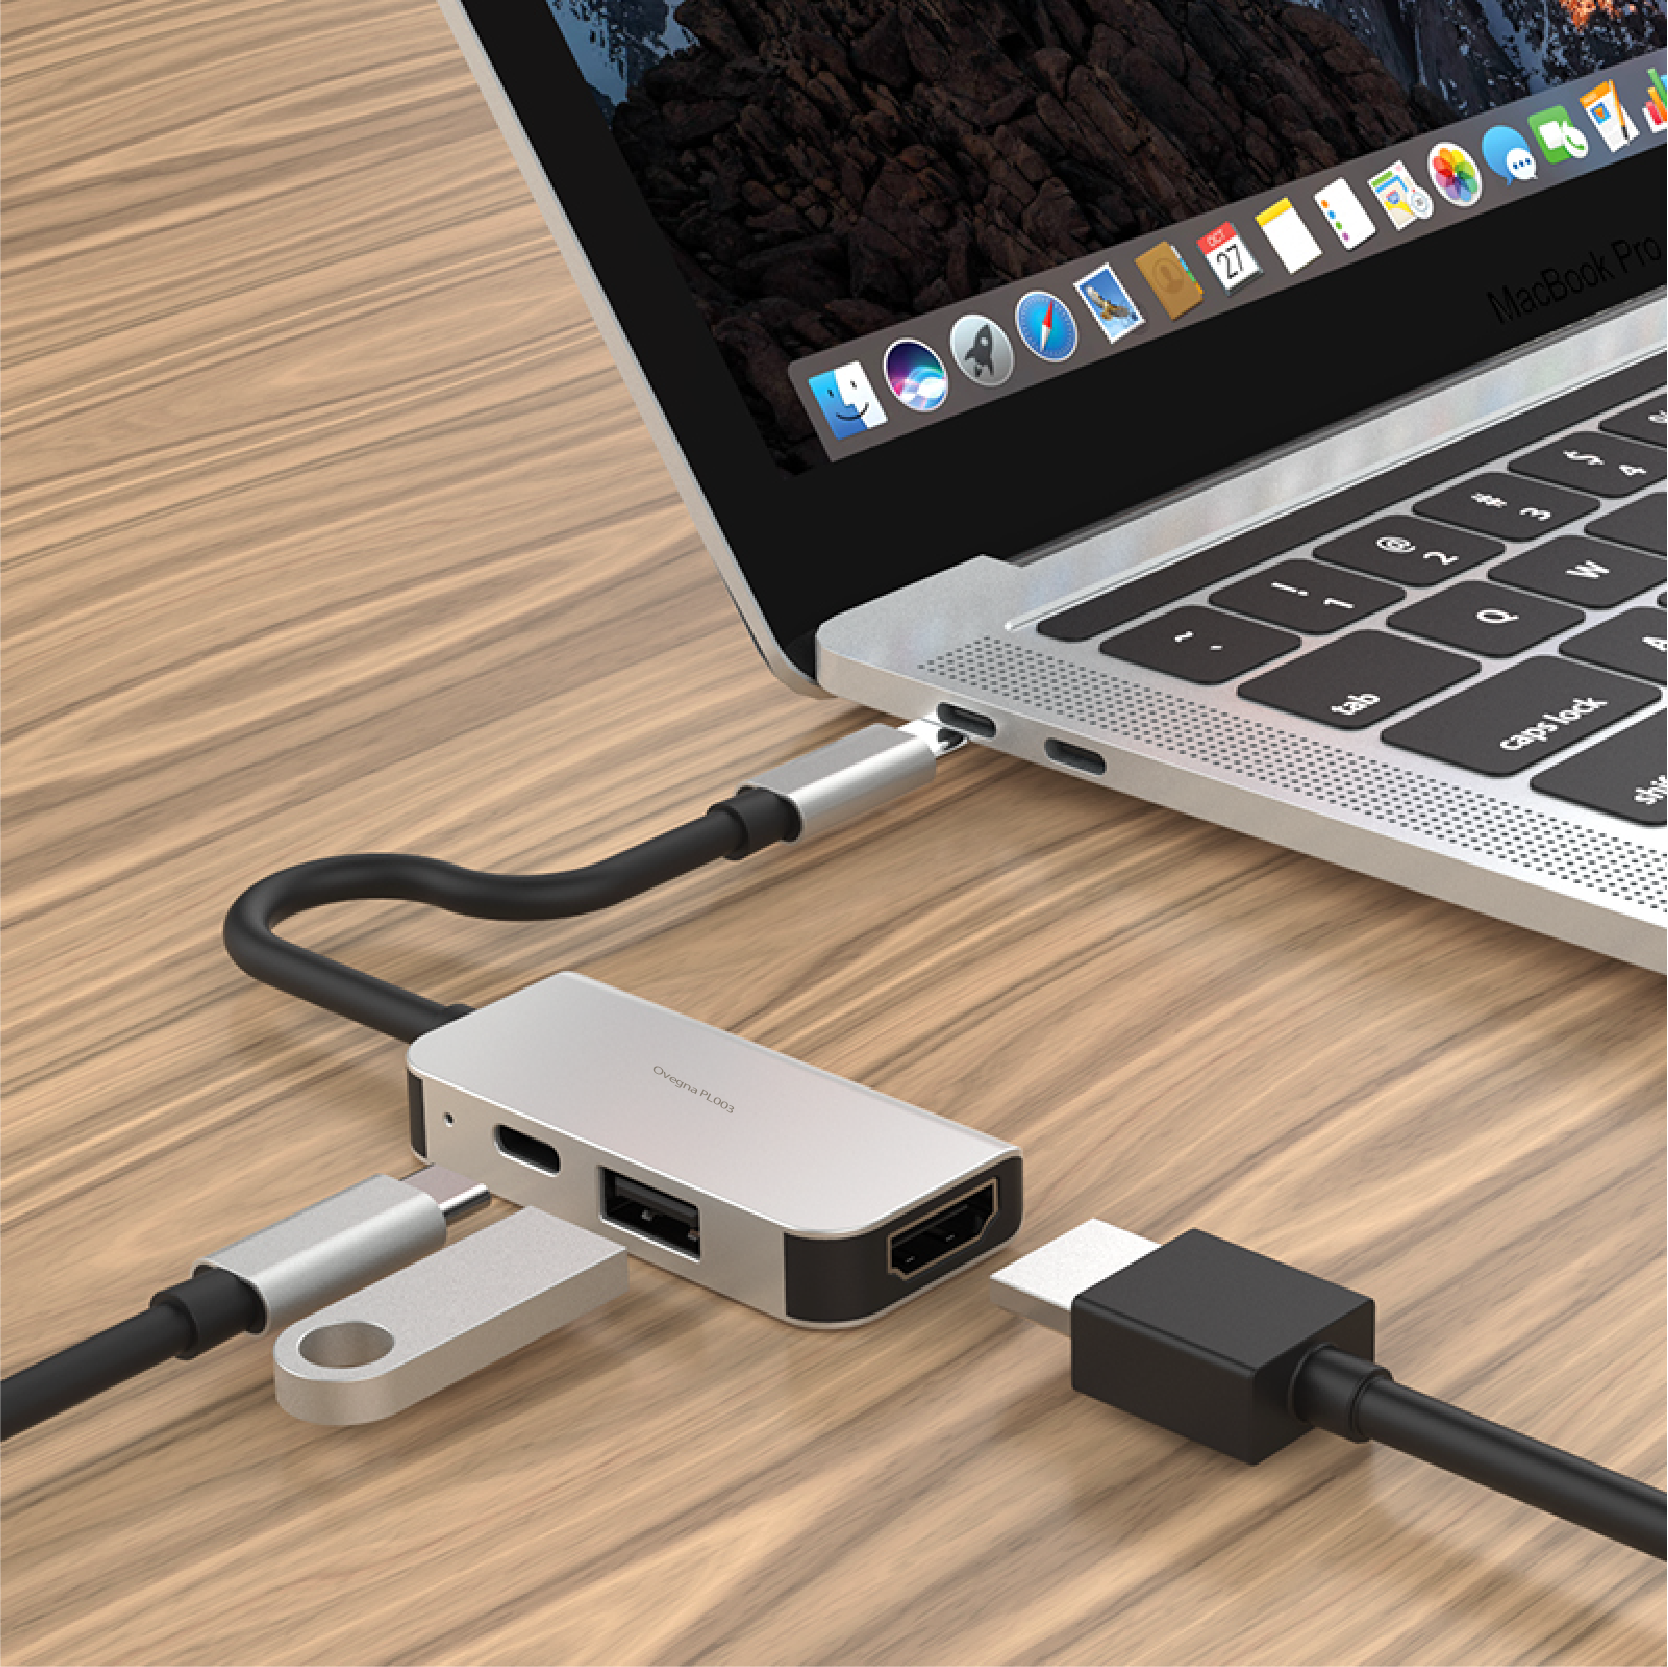 ovegna-pl003-usbc-3-in-1-hub-aluminum-alloy-usbc-to-hdmi-adapter-usb-3-0-and-usbc-output-for-tablet-macbook-air-laptop-pc-android-box--42